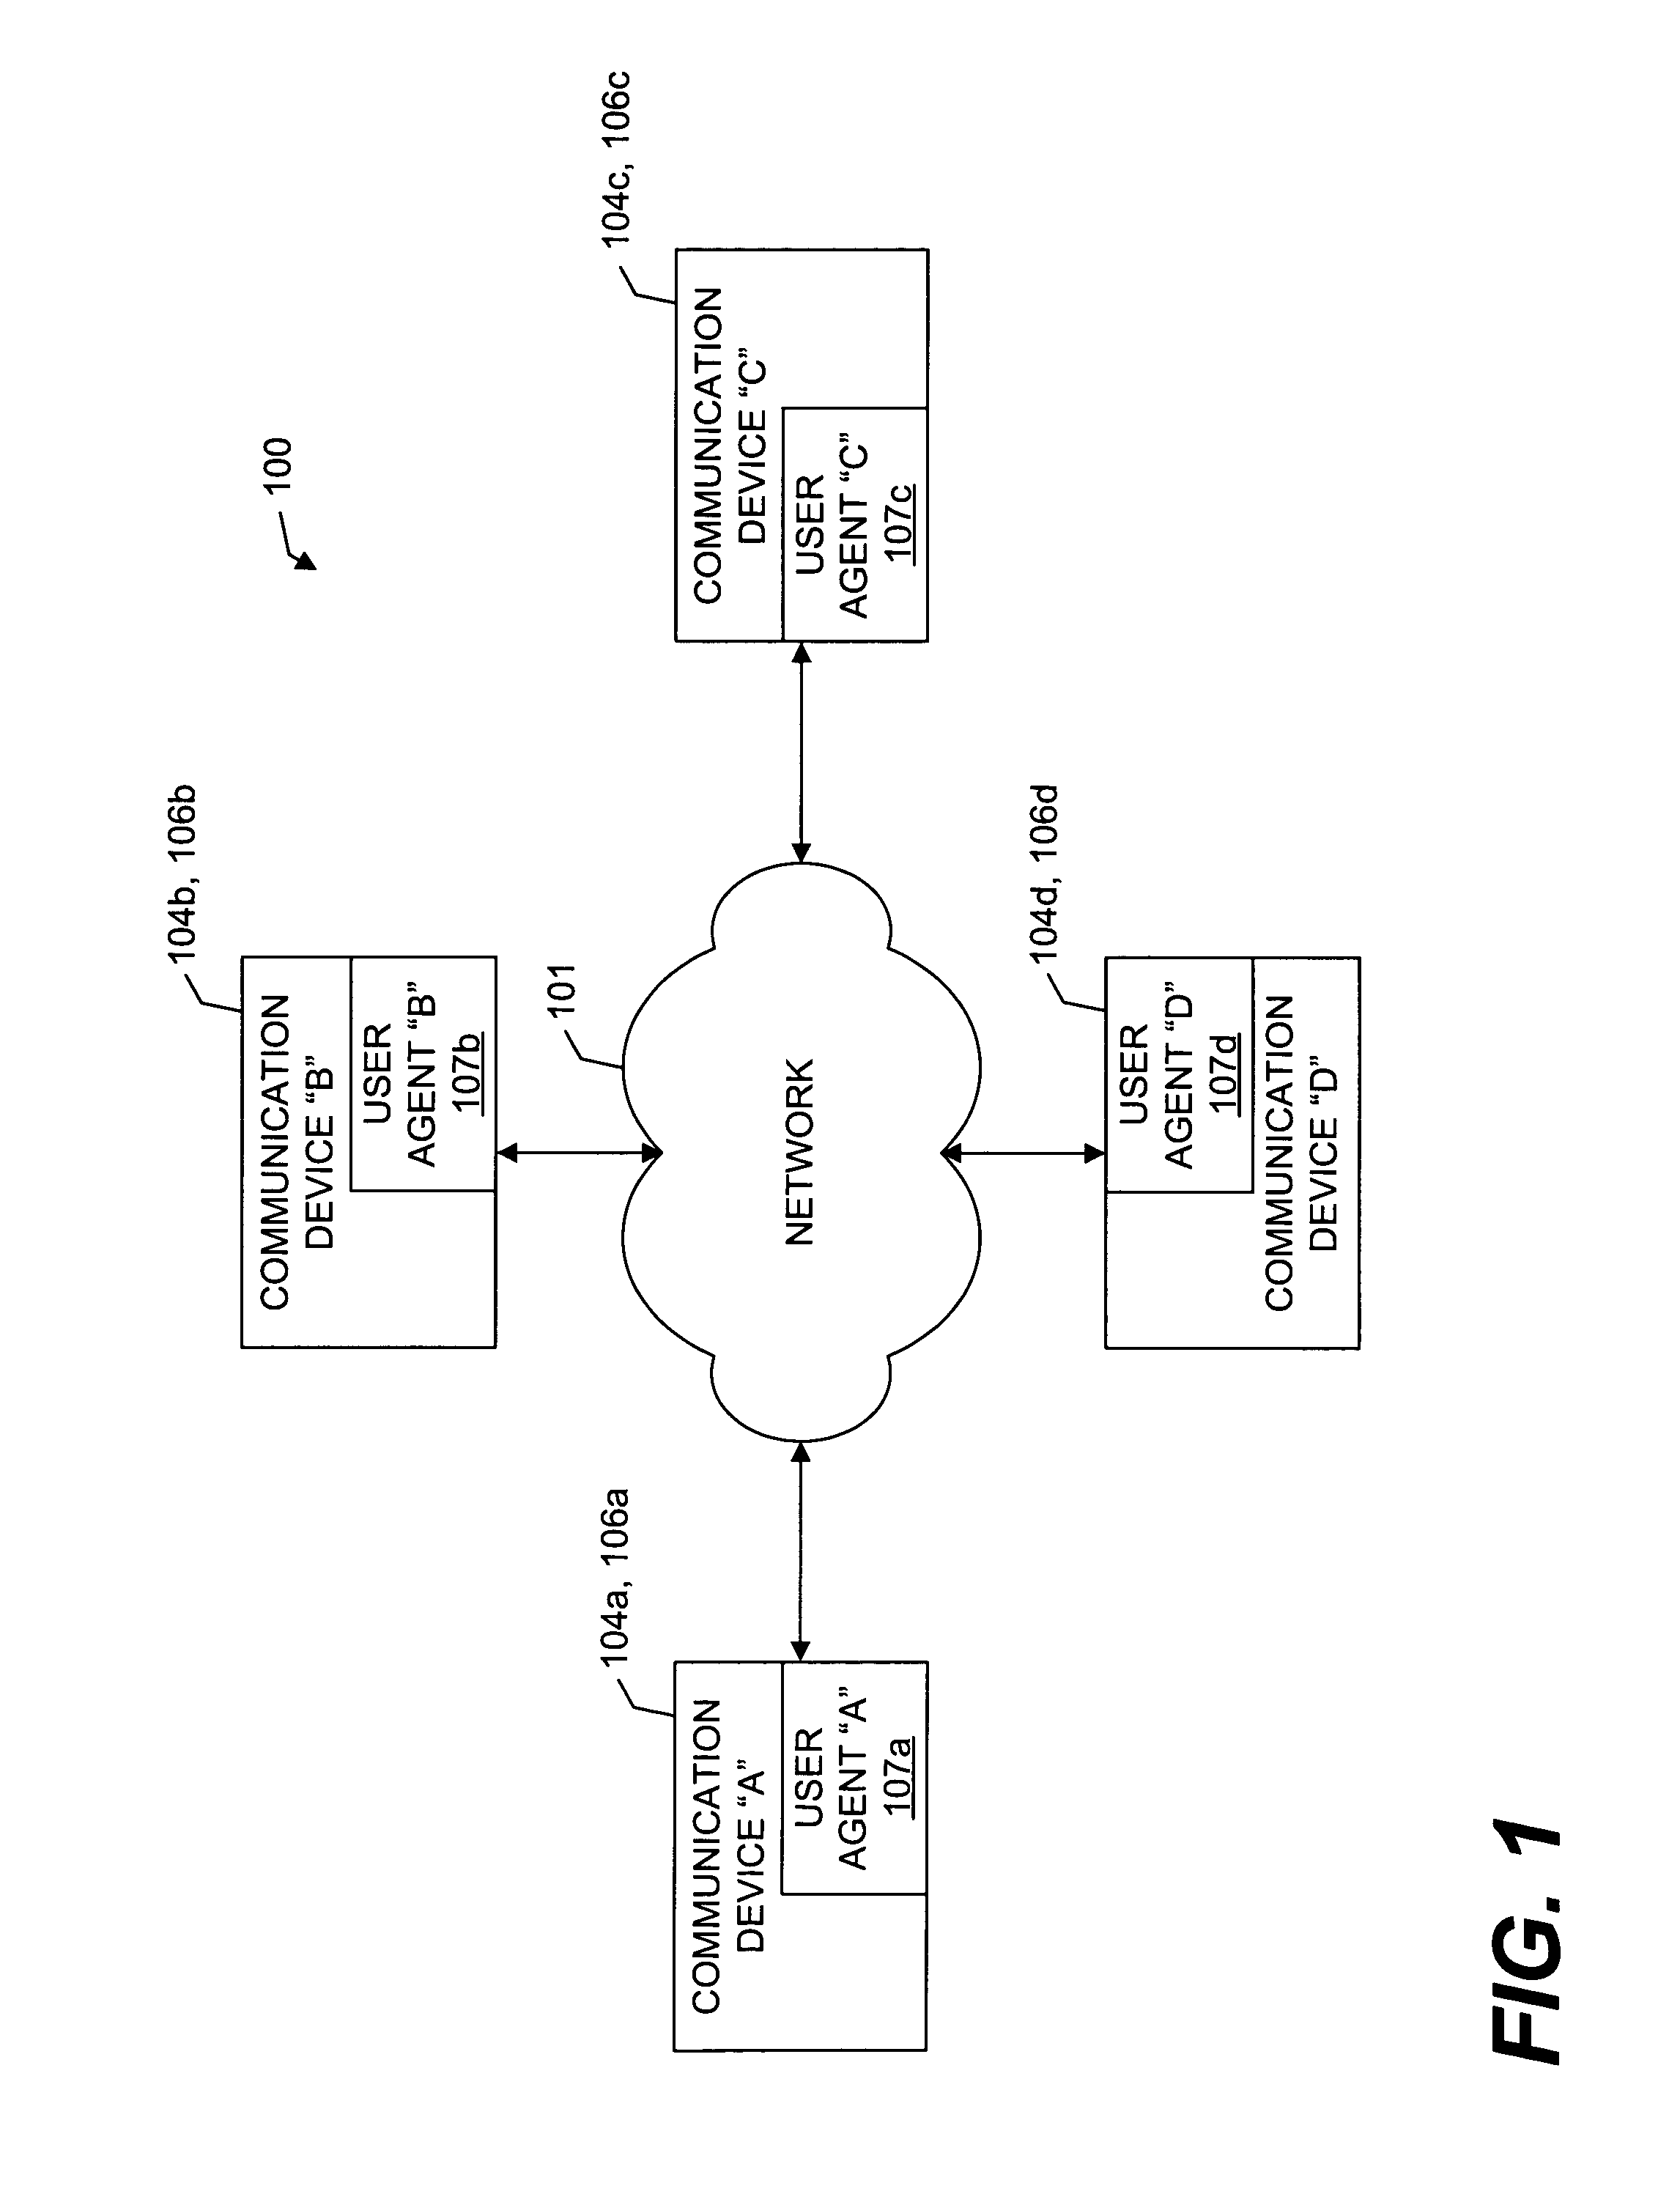 System and methods for facilitating a multiparty communications session with a dynamically designated session manager